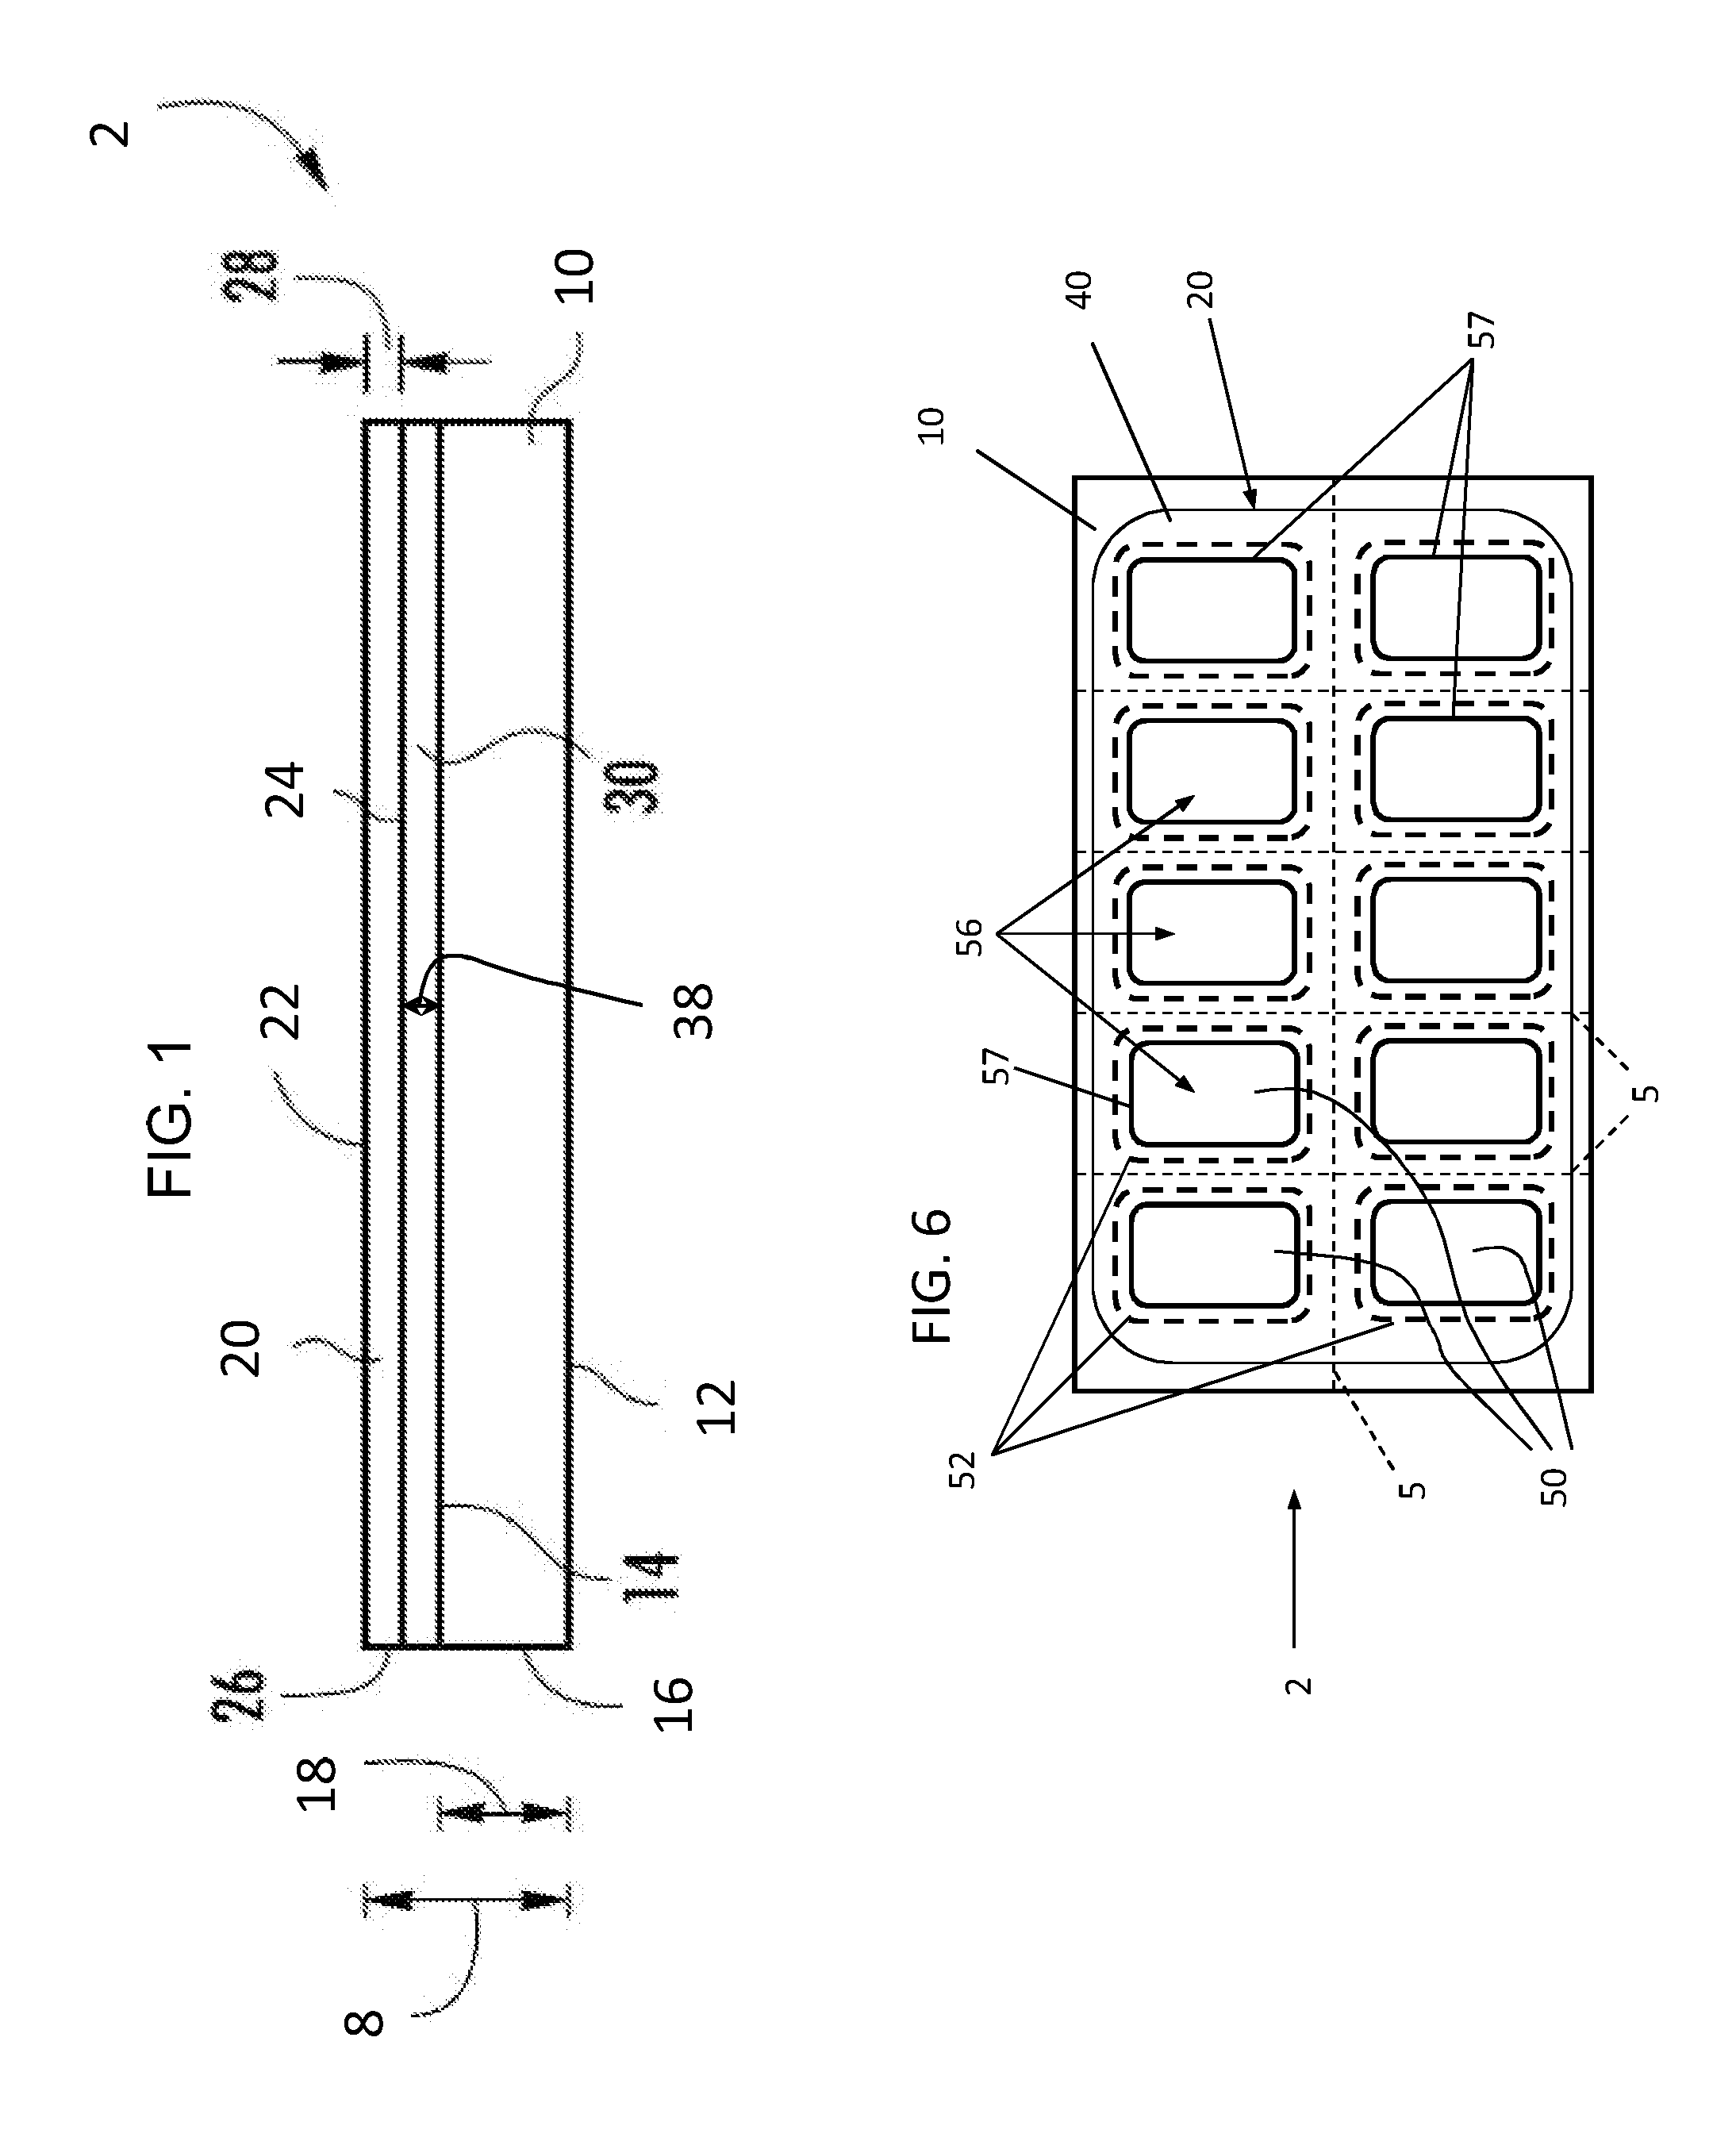 Facilitated Processing for Controlling Bonding Between Sheet and Carrier